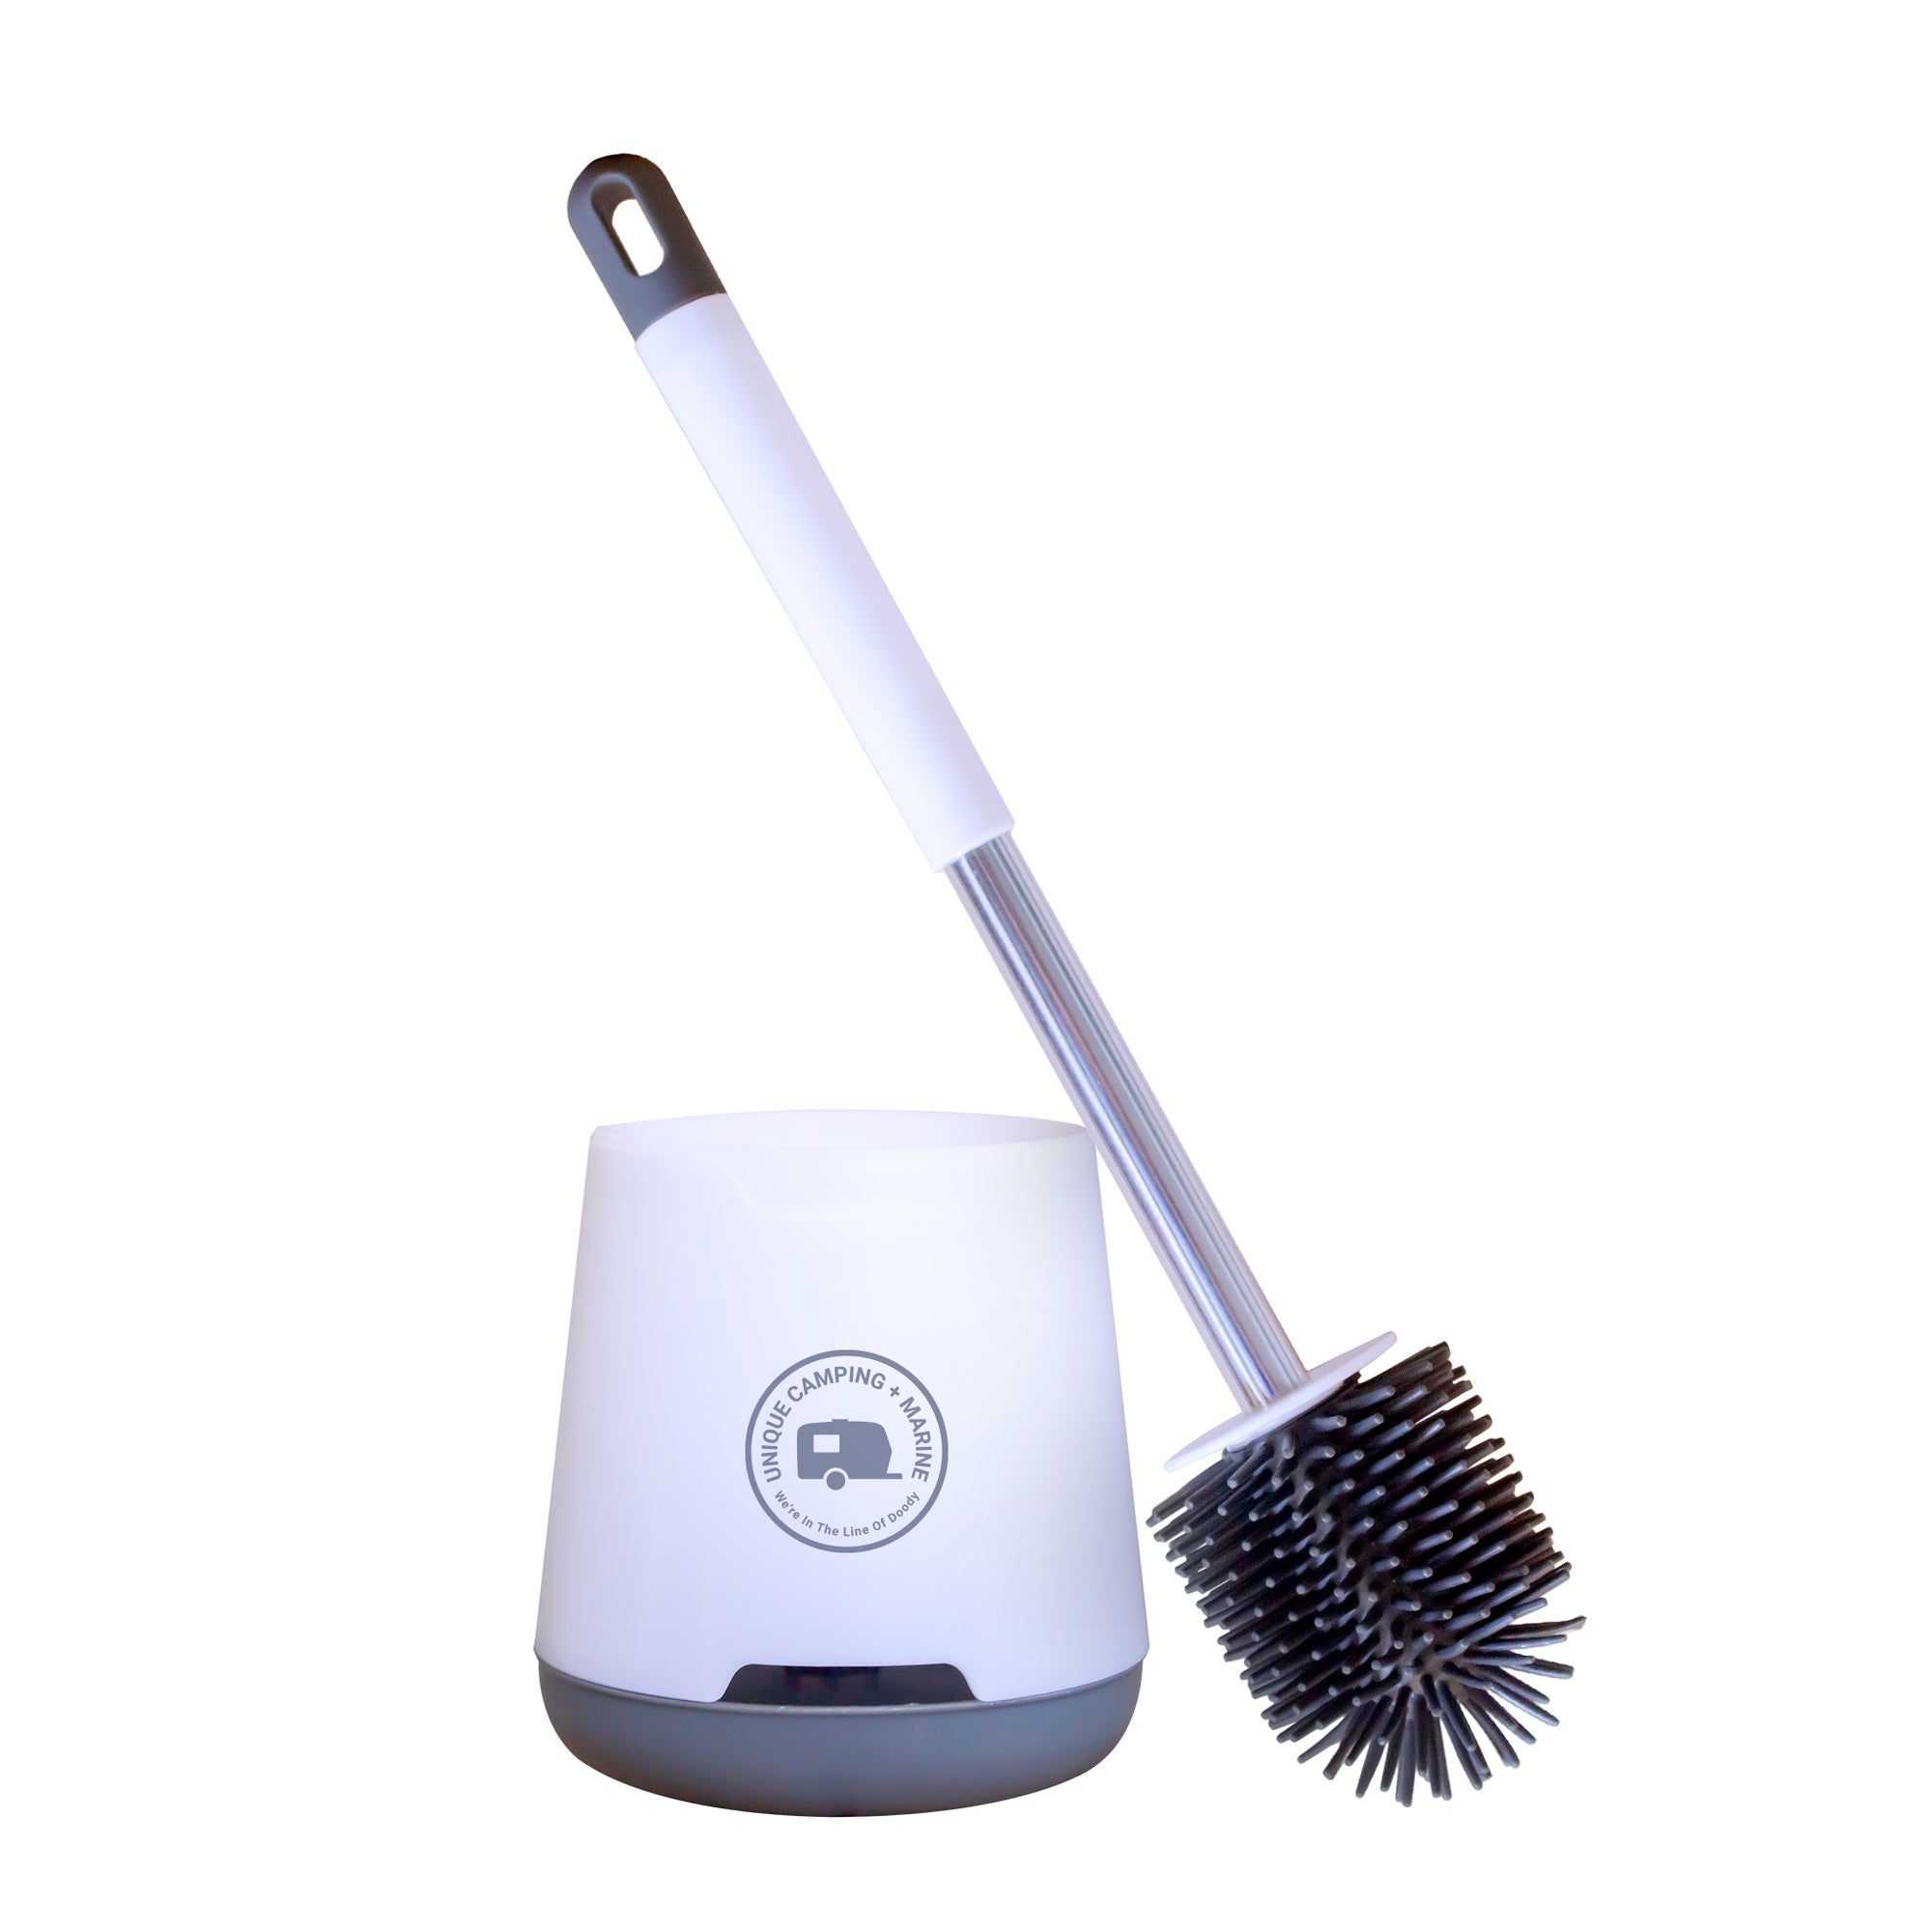 New Product alert! RV Toilet Brush + Drip Tray and Holder. Unique Camping + Marine